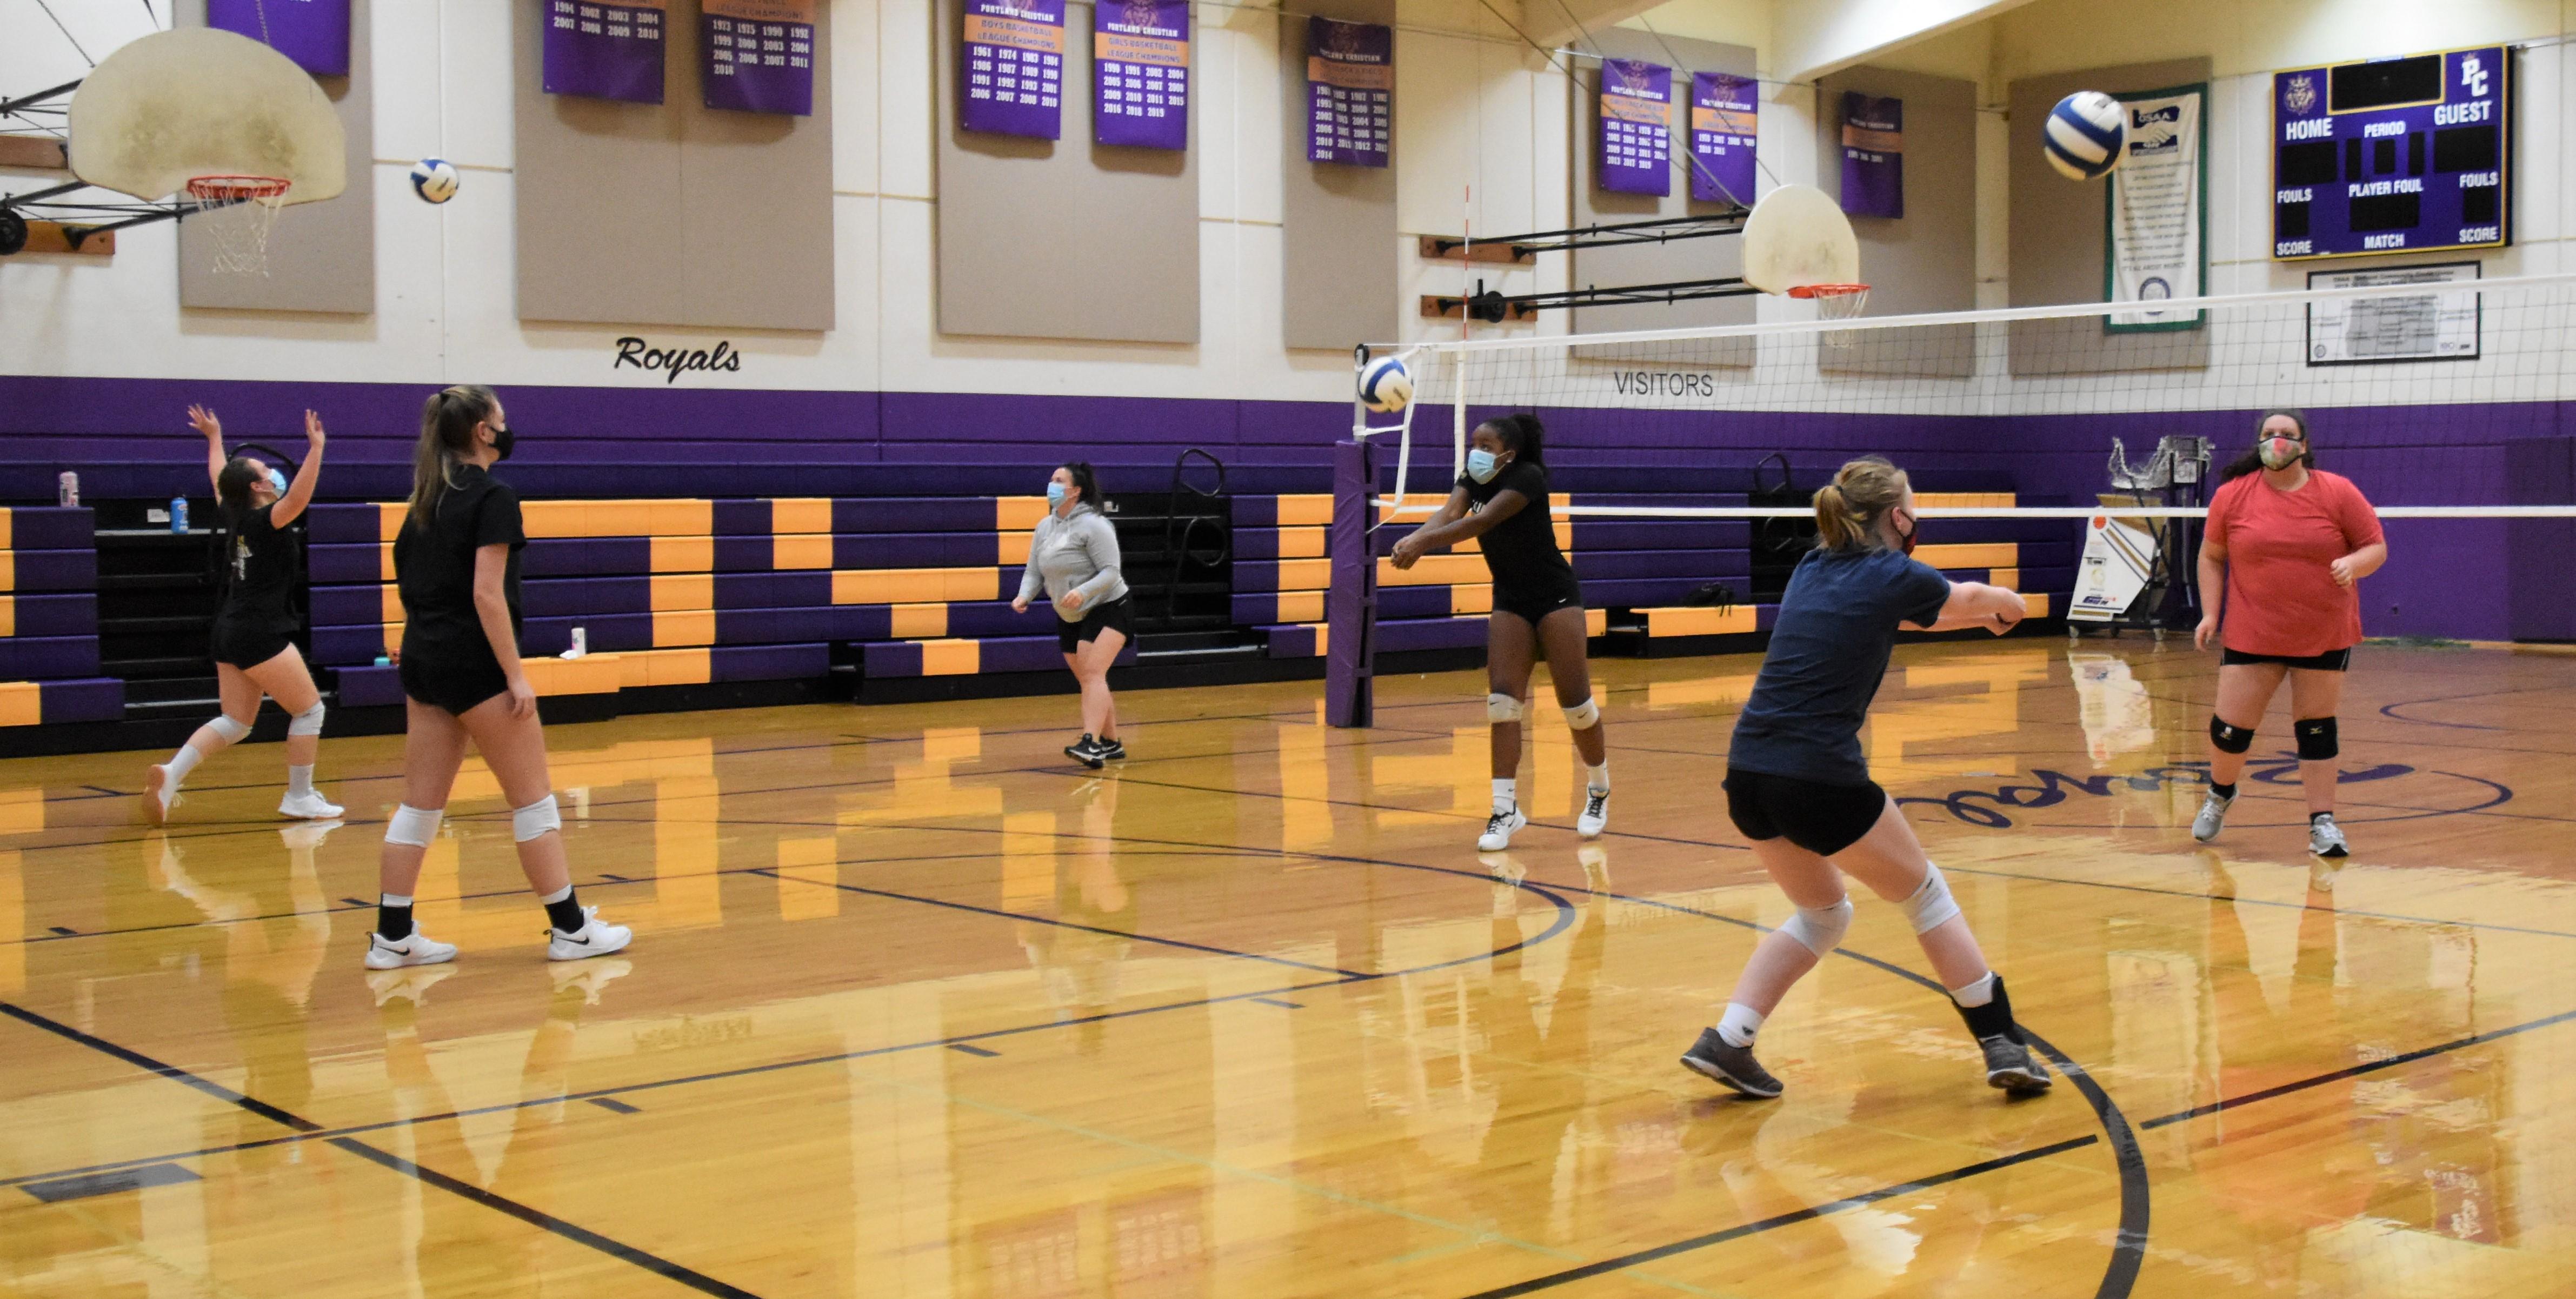 Volleyball athletes warming up